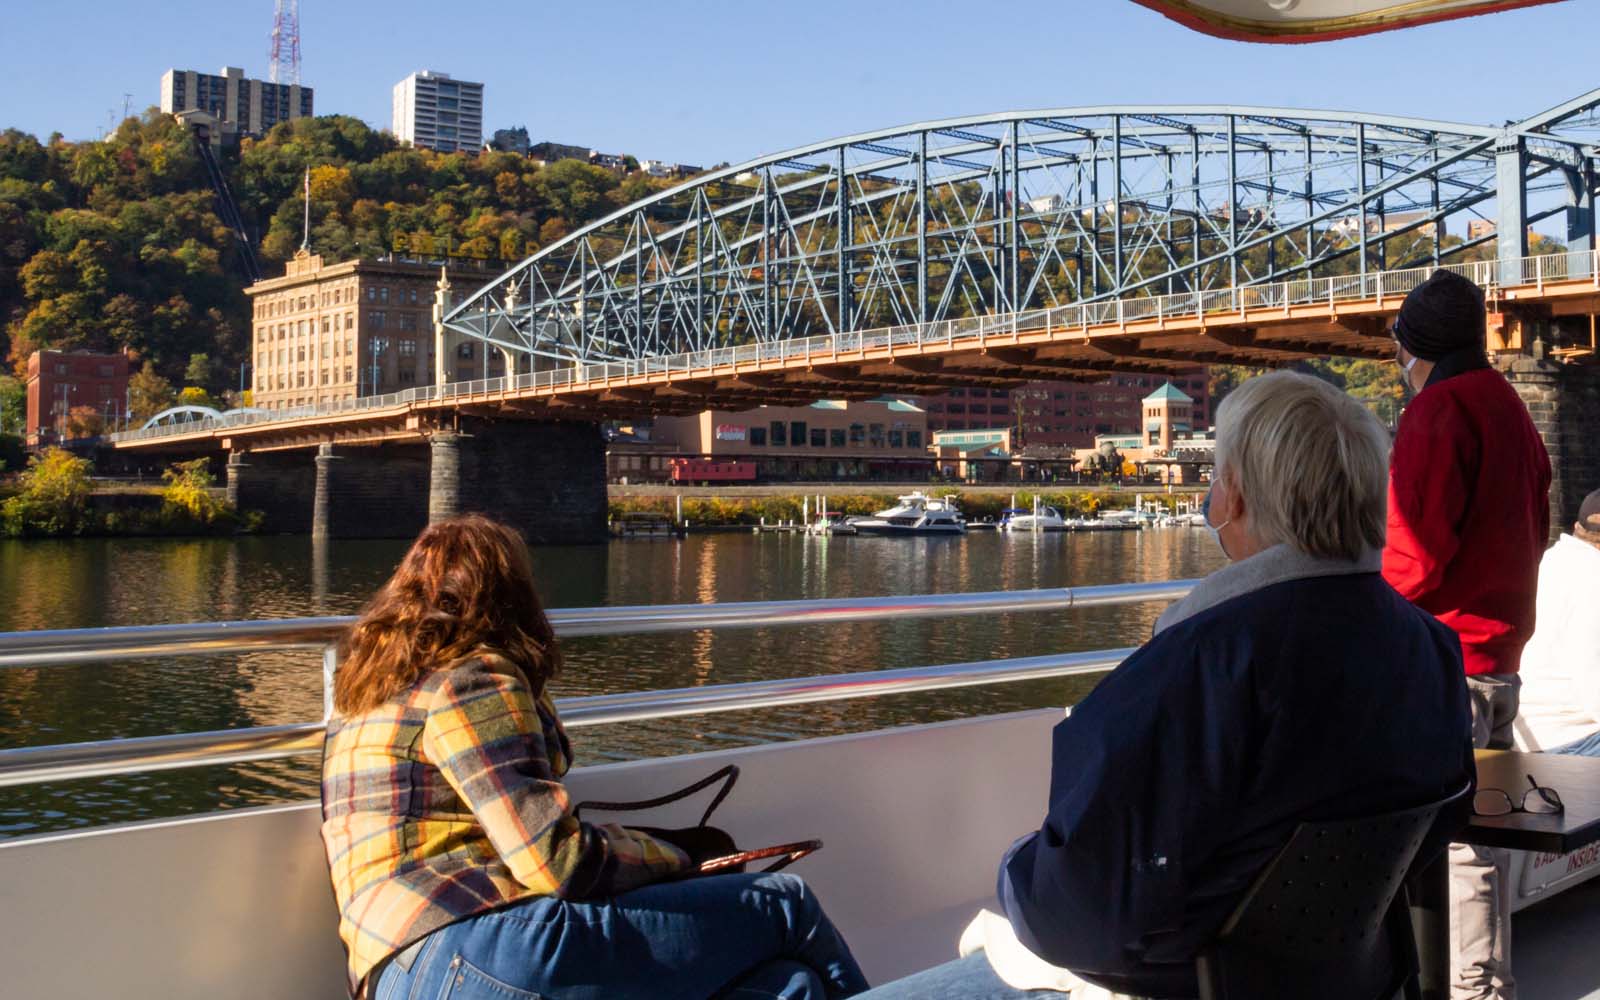 riverboat tours pittsburgh pa